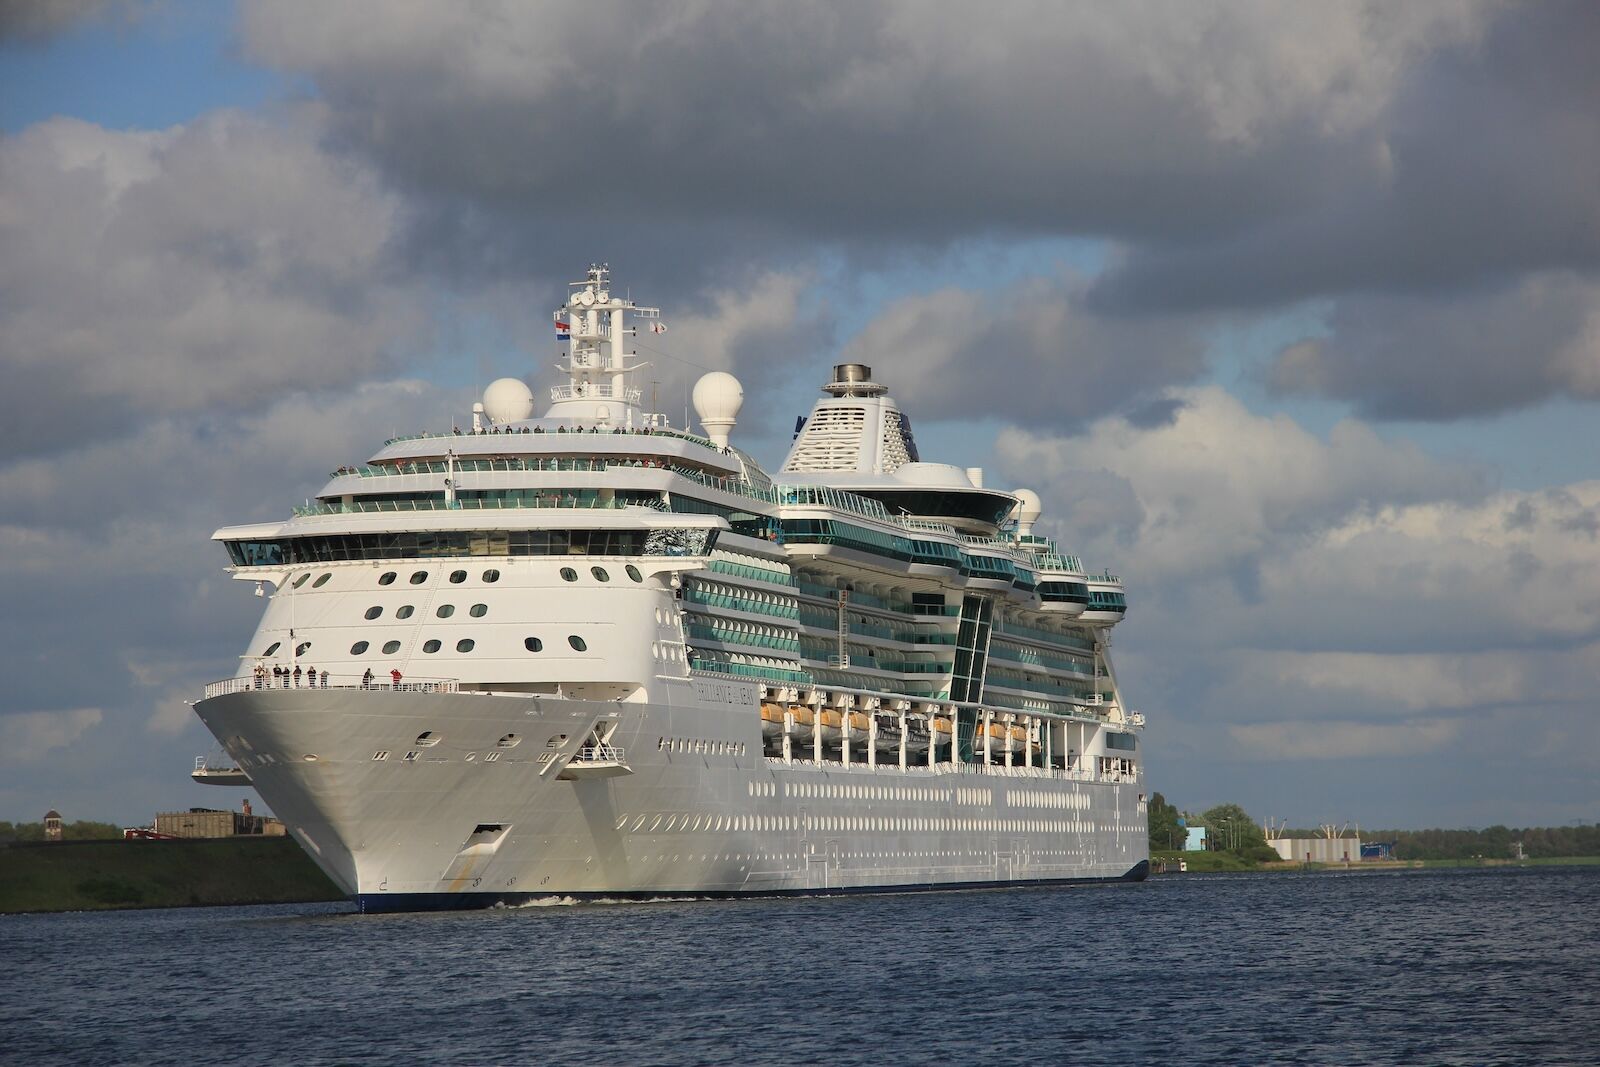 IJmuiden, the Netherlands - May, 12th 2012: The Brilliance of the Seas is a 961.9ft long cruise ship, built in 2002, owned and operated by Royal Caribbean International.